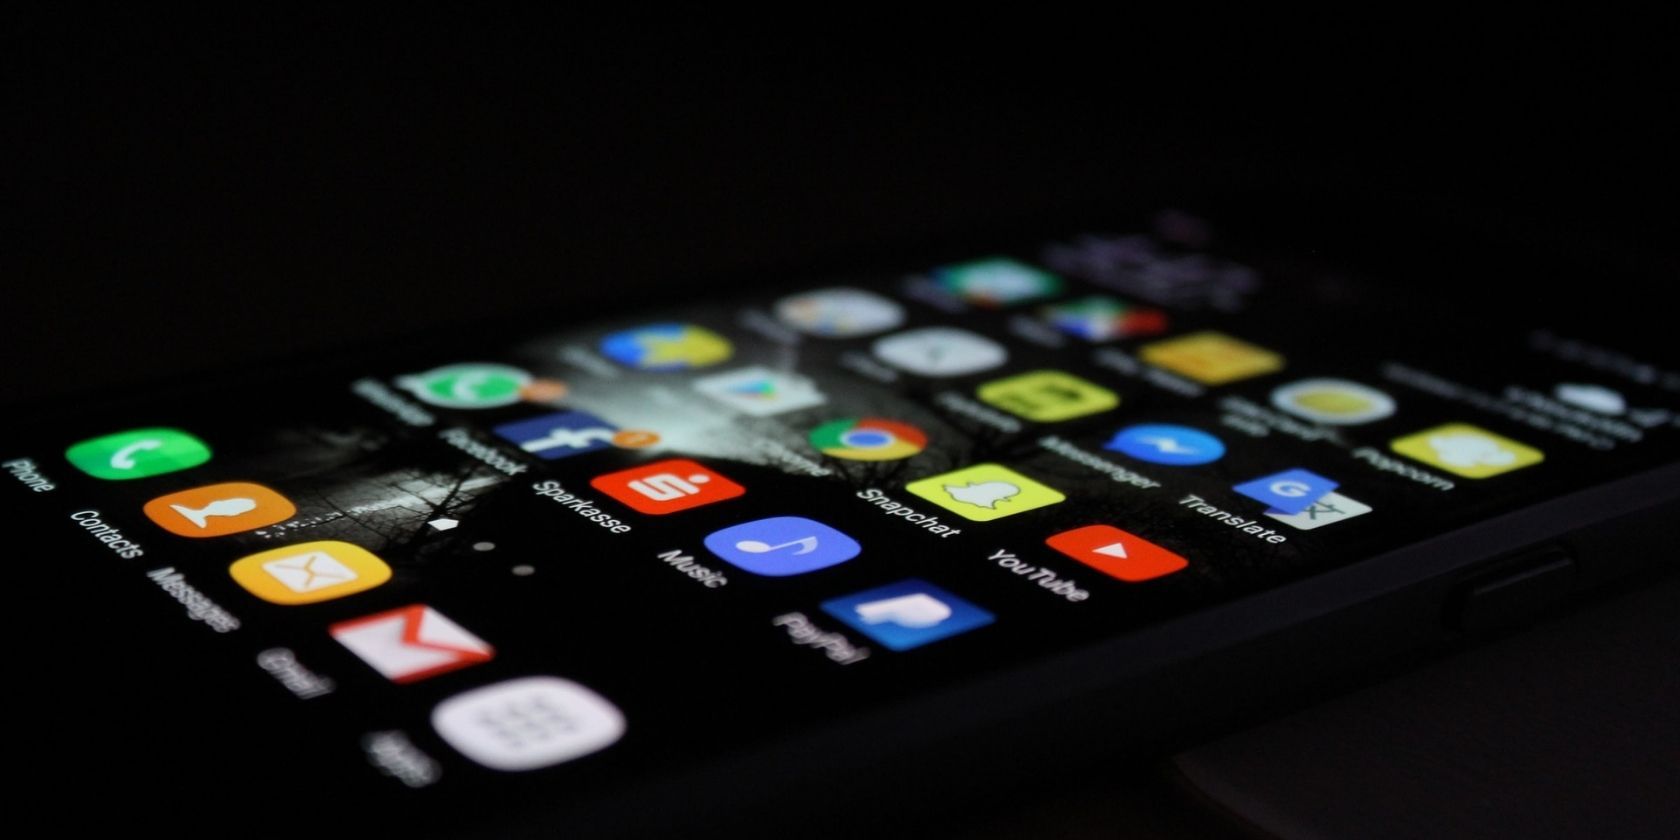 upclose image of a black iPhone laying down with lit screen